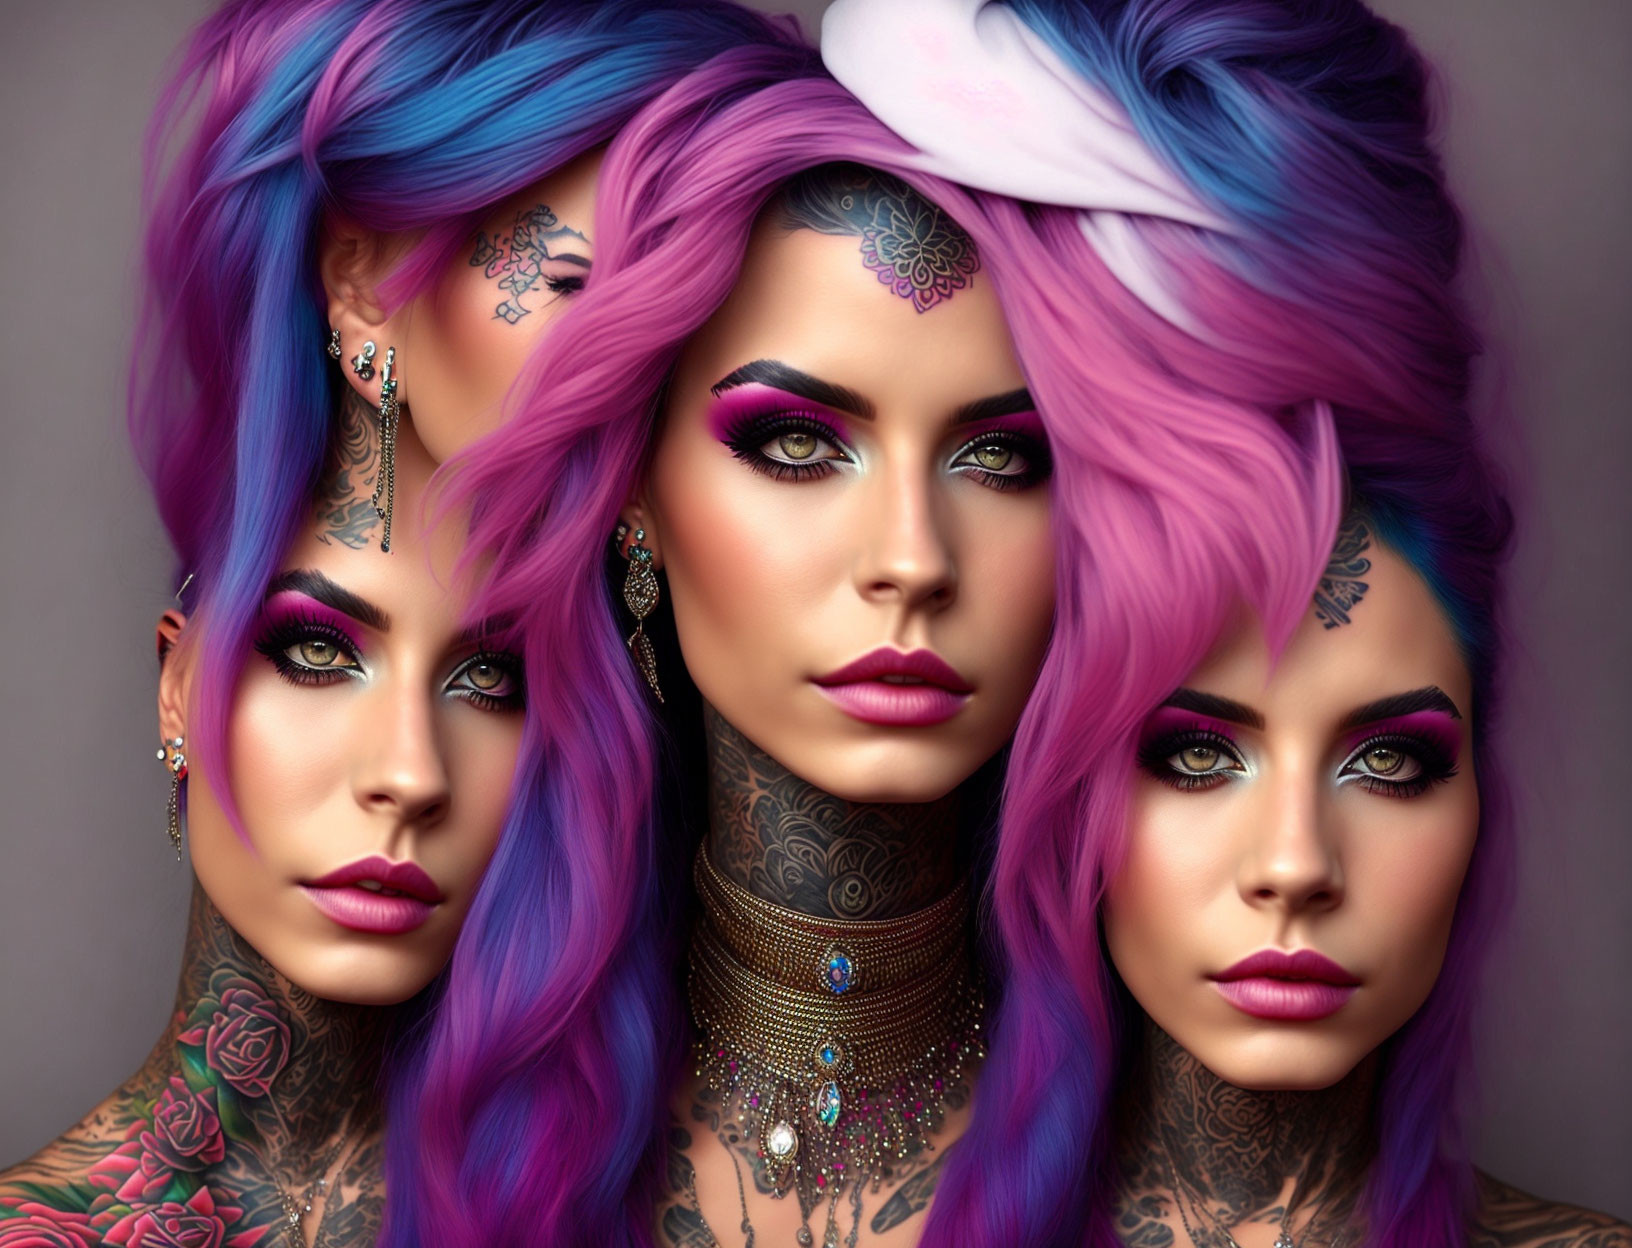 Three women with vibrant purple and blue hair, intricate tattoos, bold makeup, and ornate jewelry on